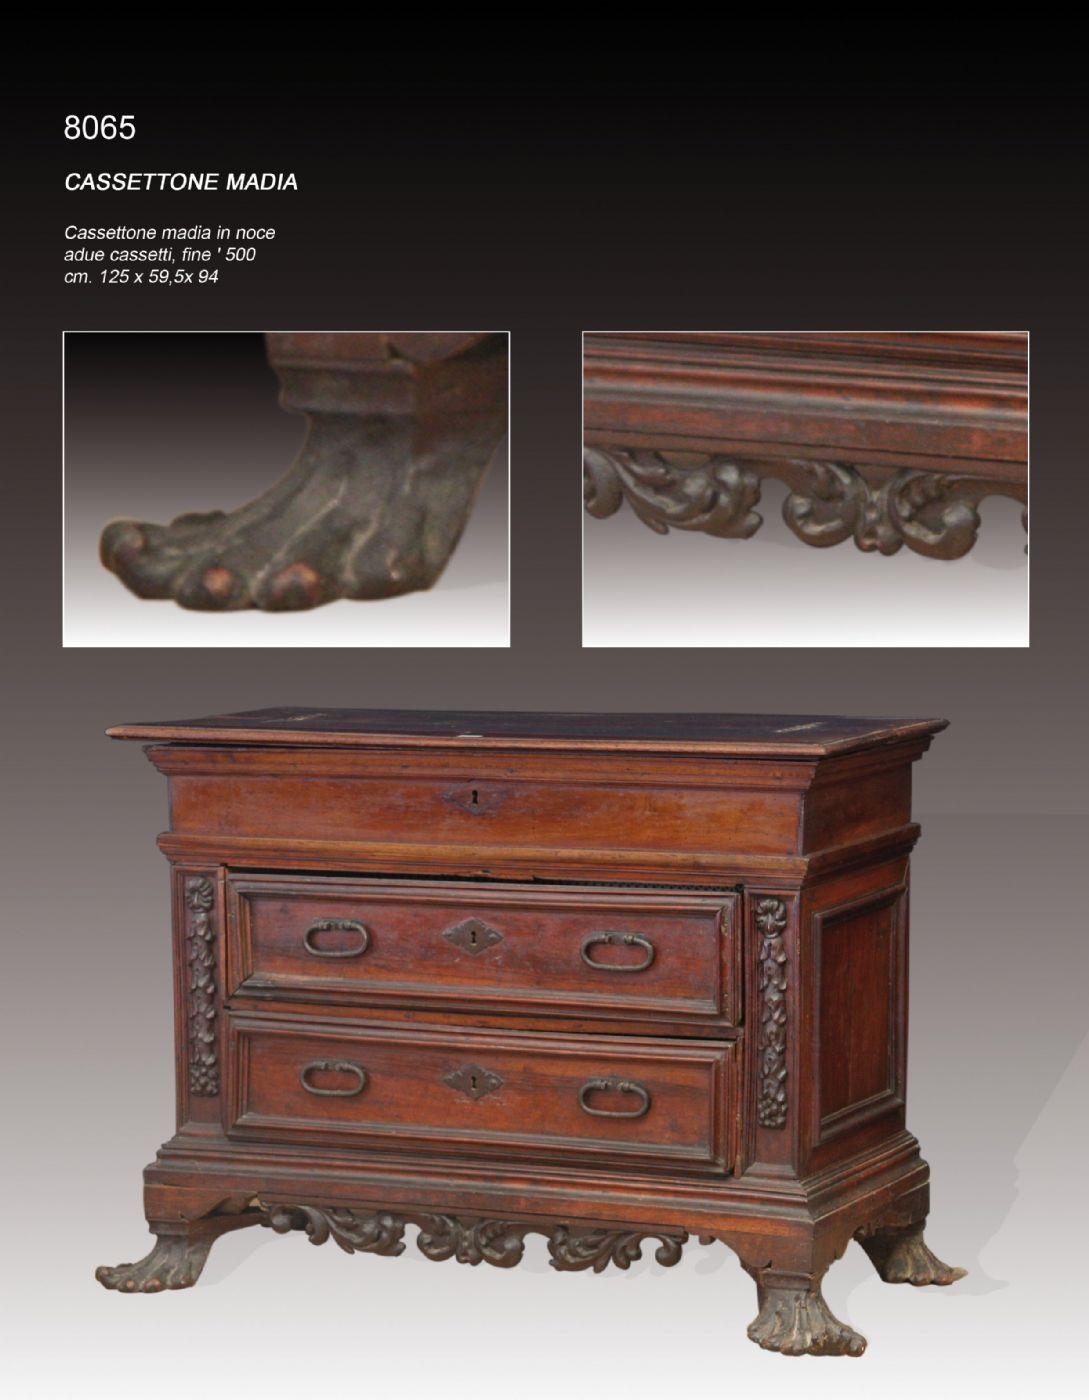 Chest of drawers in walnut with two drawers and opening shelf seventeenth century 
Period : Seventeenth century
Particular and rare chest of drawers of the seventeenth century, in walnut with two drawers and openable shelf.
Coming from the Marche